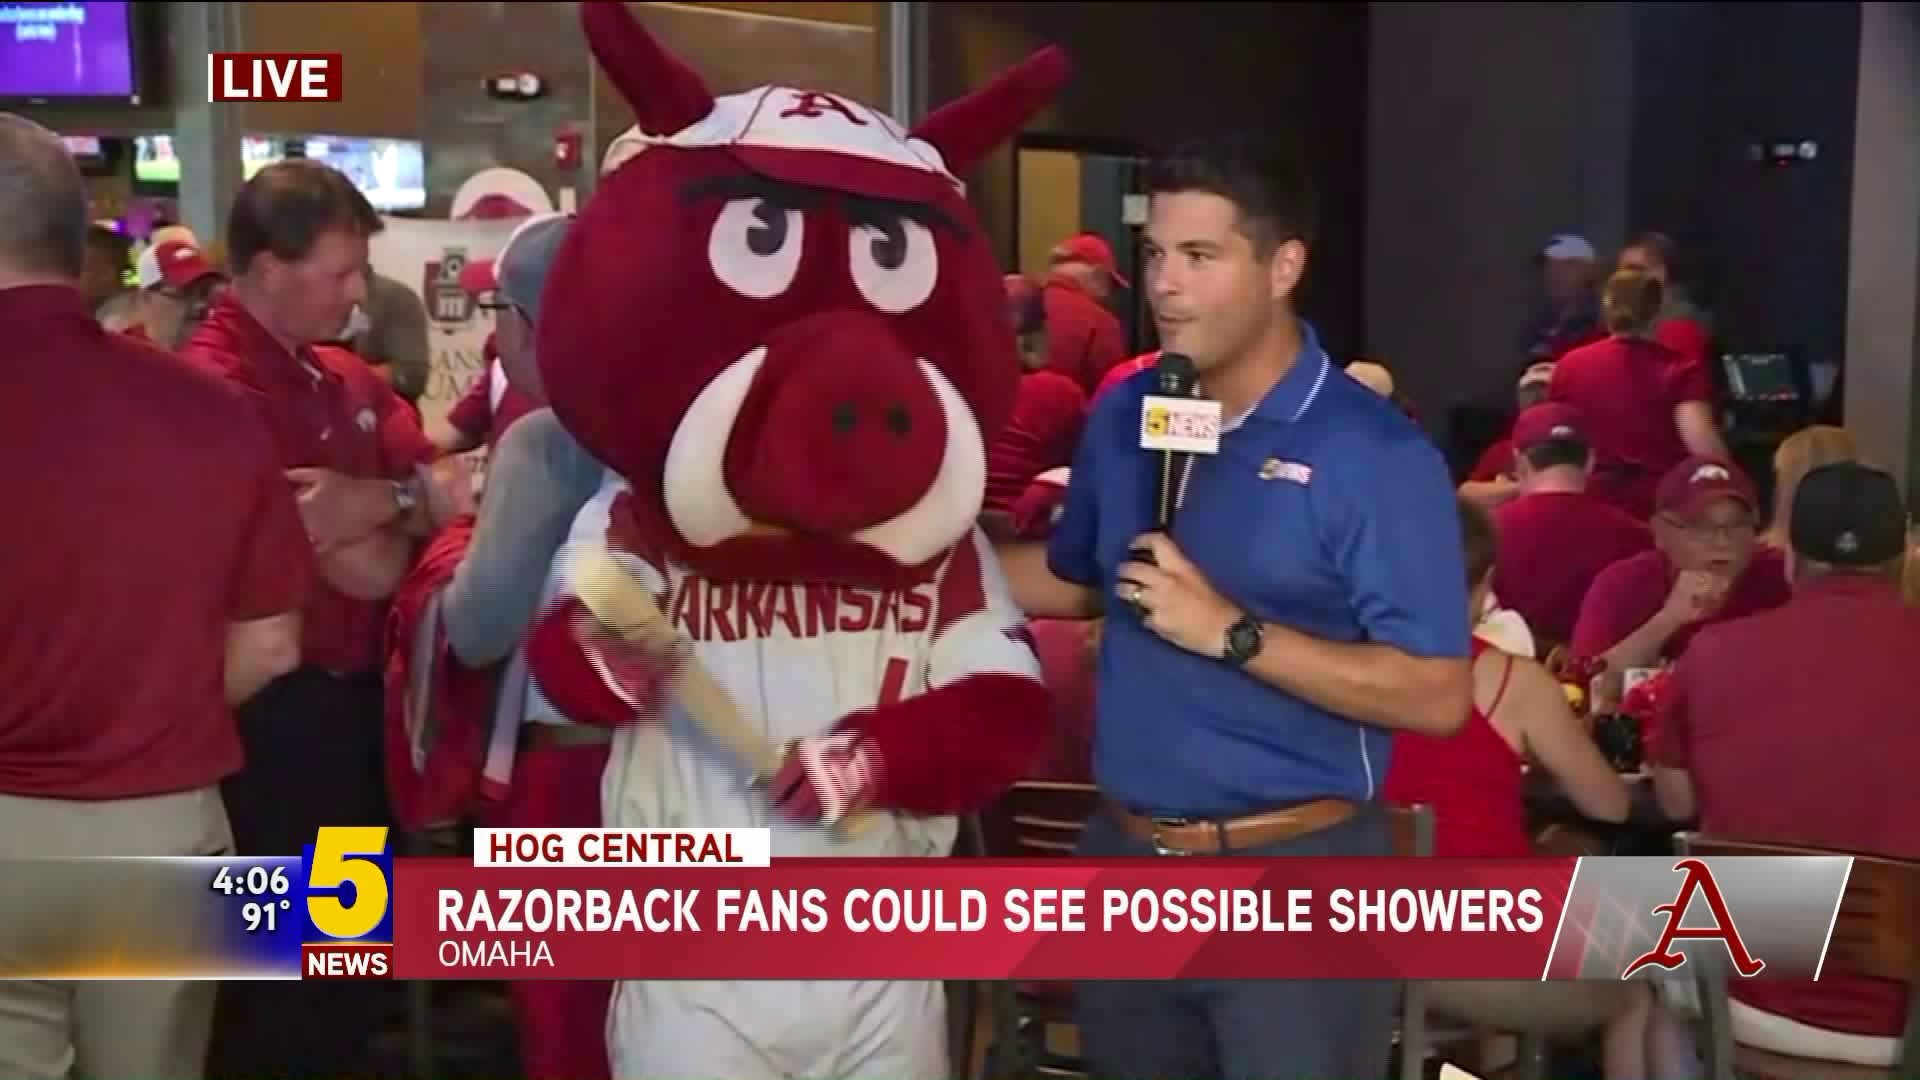 Razorback Fans Could See Possible Showers